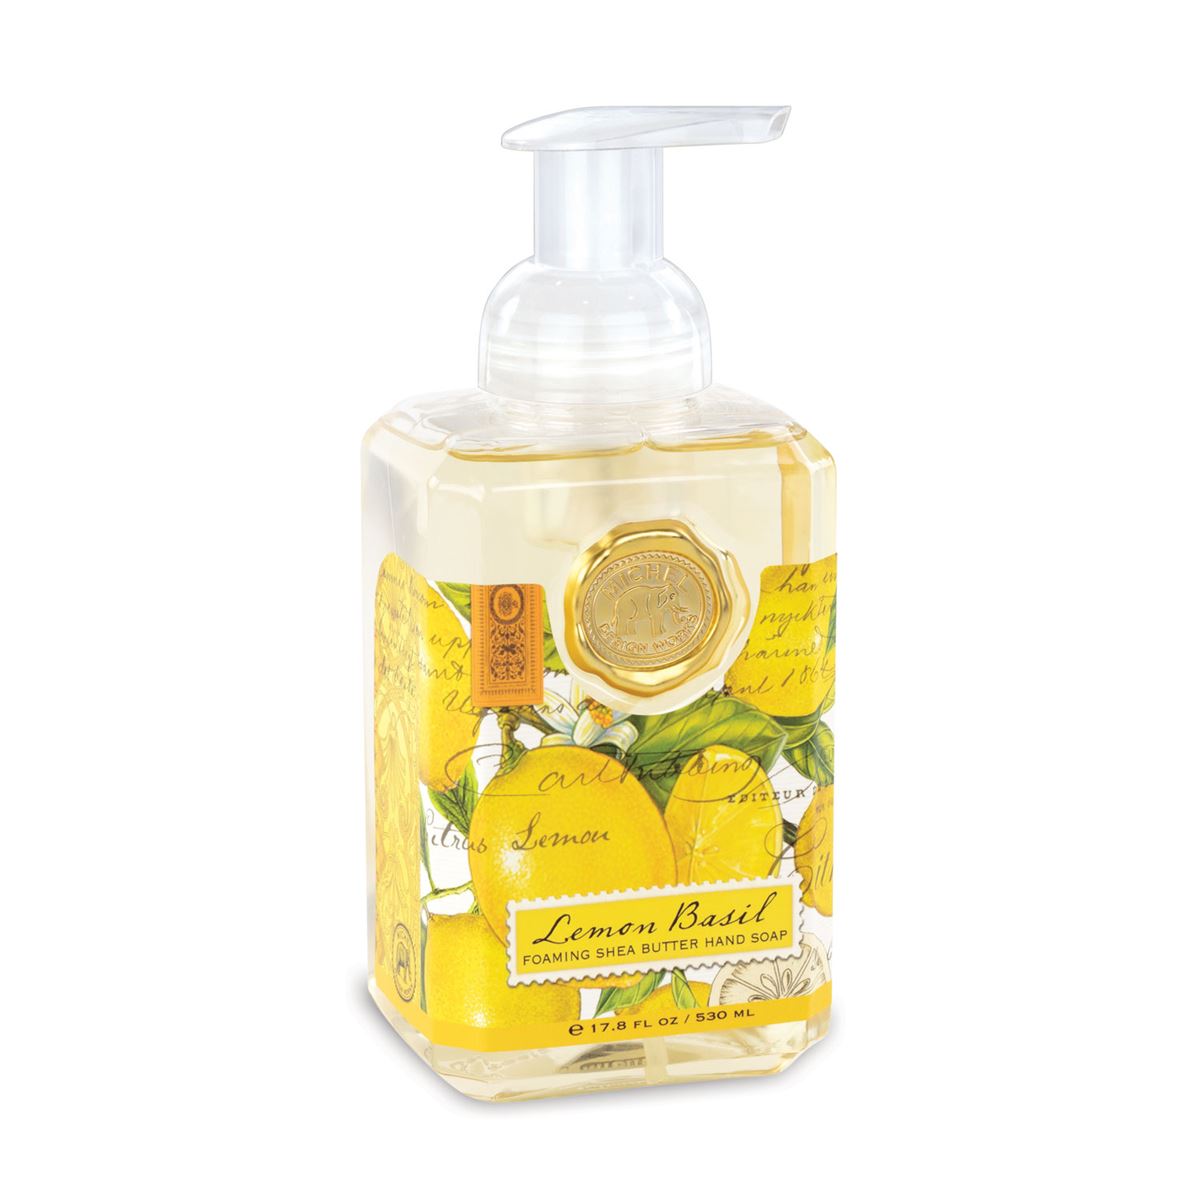 What could be better than the most-loved Lemon Basil, with its fresh citrus scents of lemon and mandarin enhanced with green basil leaf? This generously sized foaming hand soap contains luxurious shea butter and aloe vera for gentle cleansing and moisturizing.